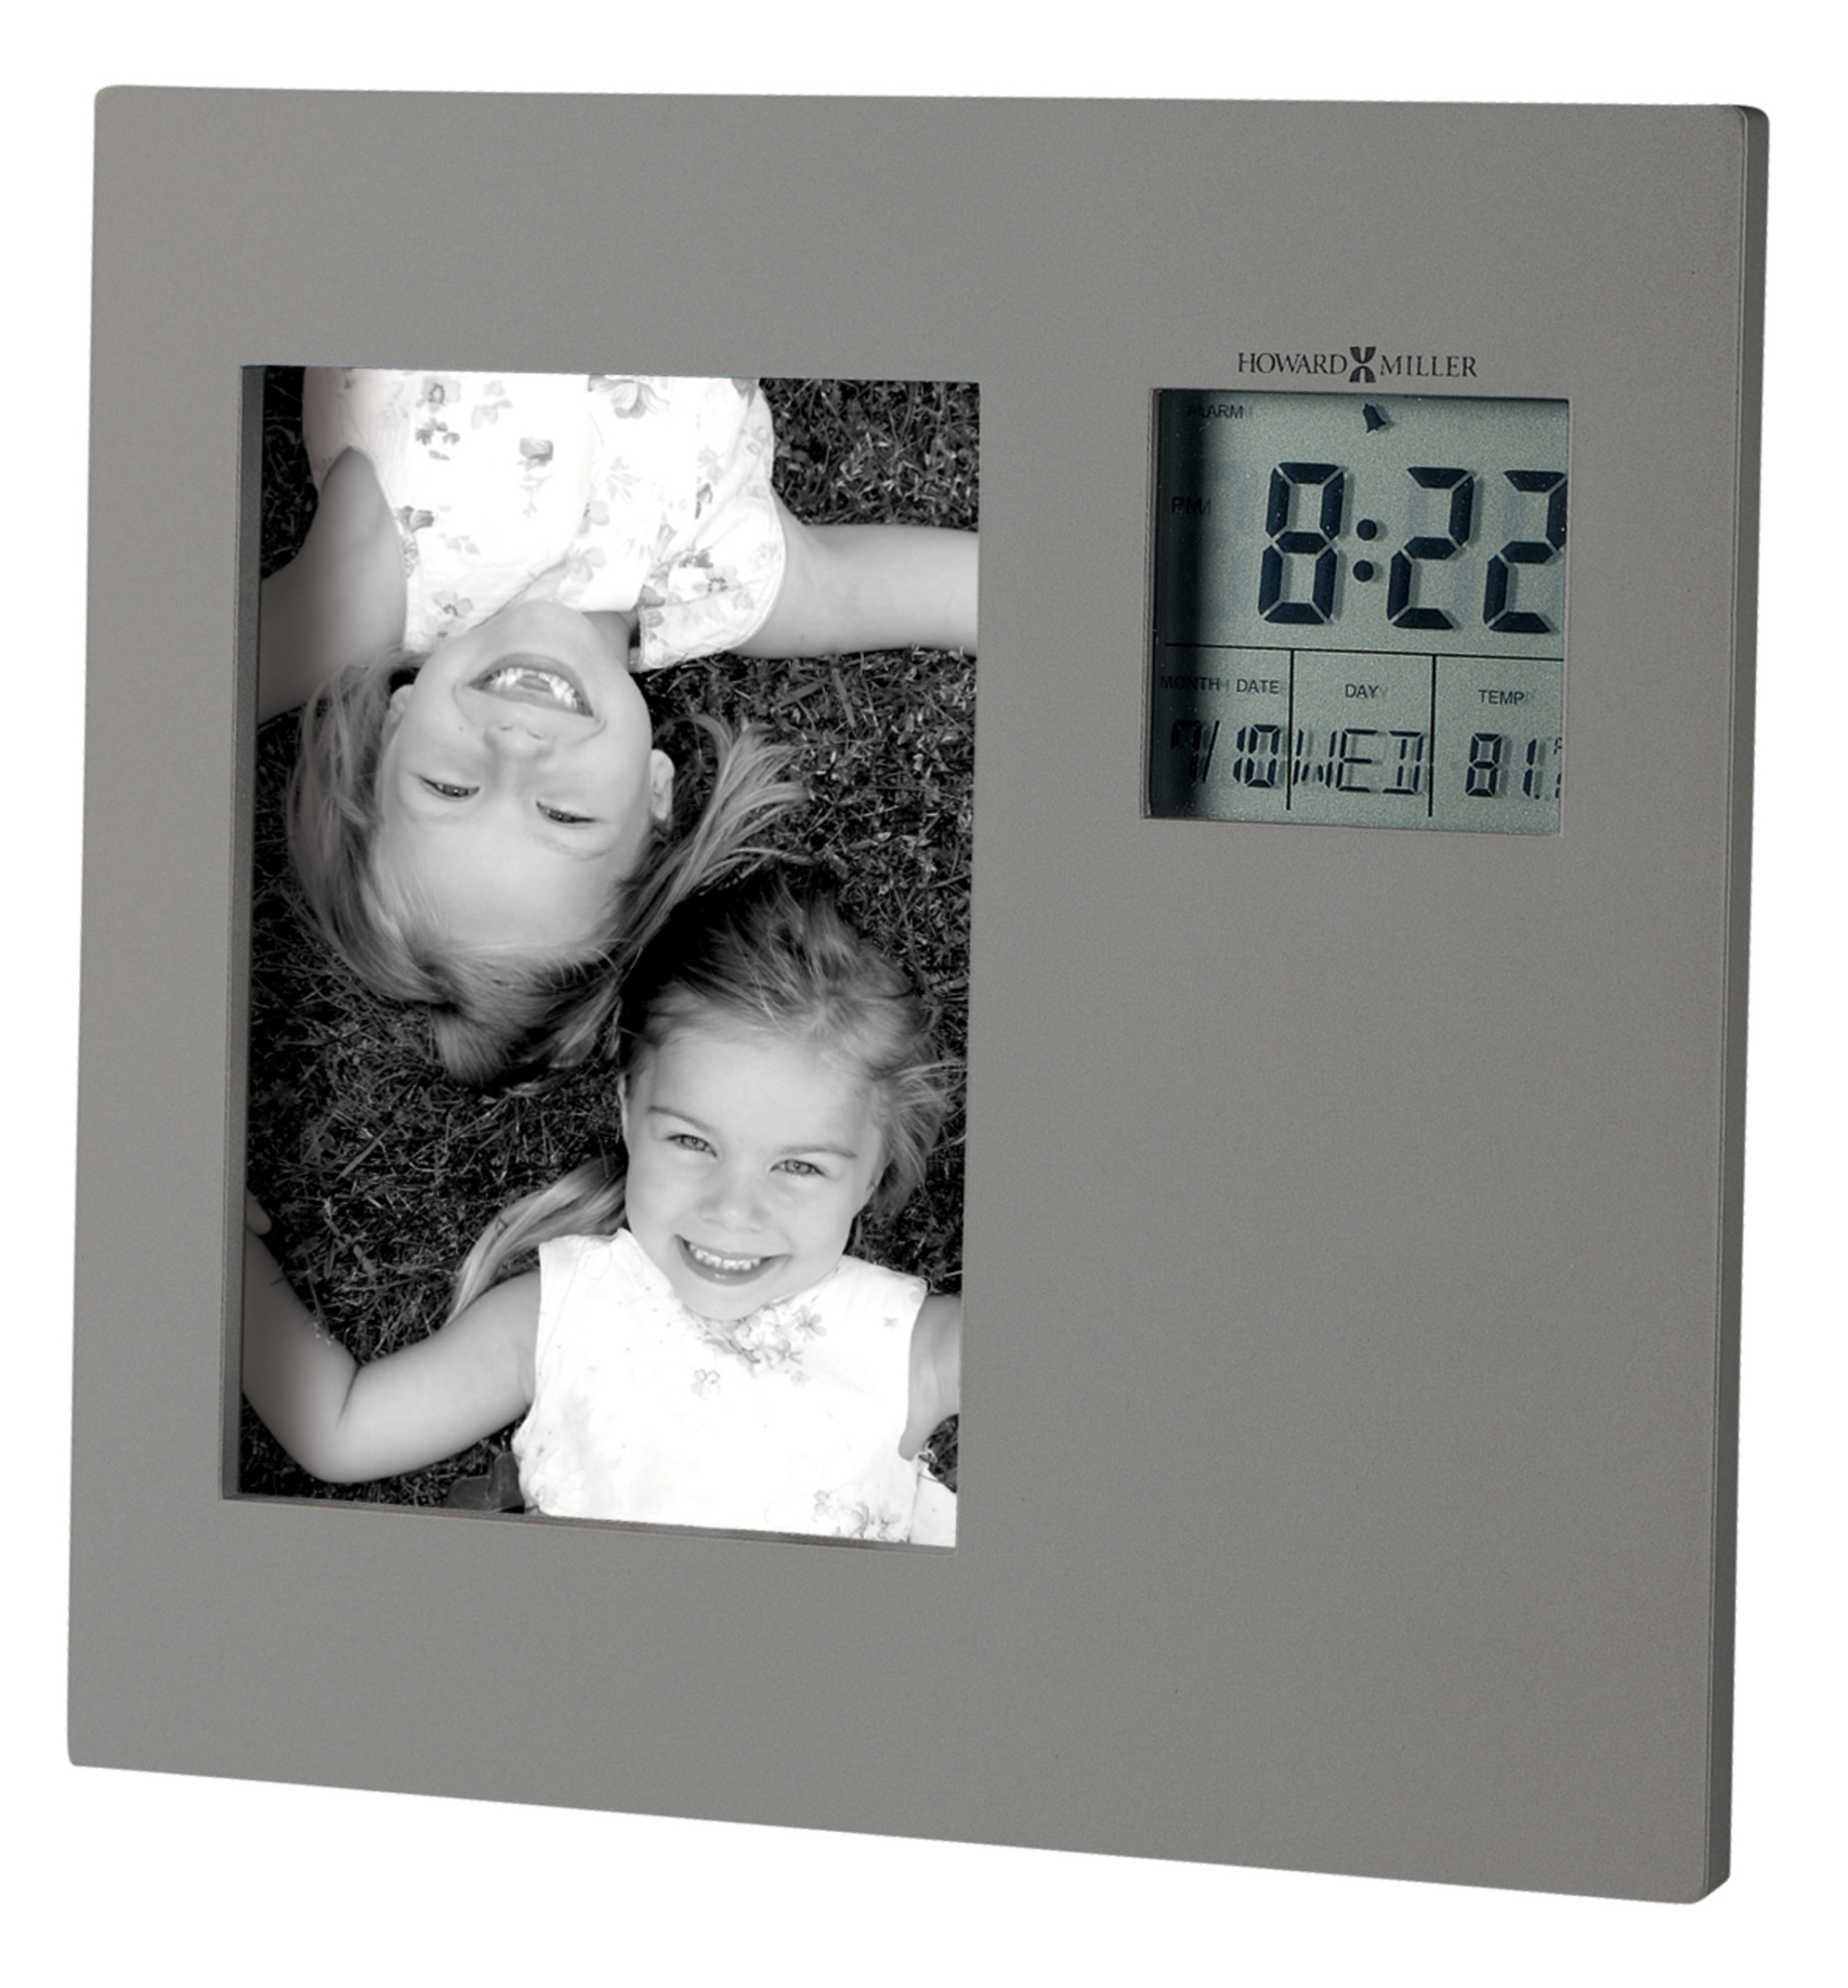 Howard Miller Picture This Table Clock 645-553 – Titanium Photo Frame & LCD Digital Display with Quartz, Alarm Movement - image 1 of 2